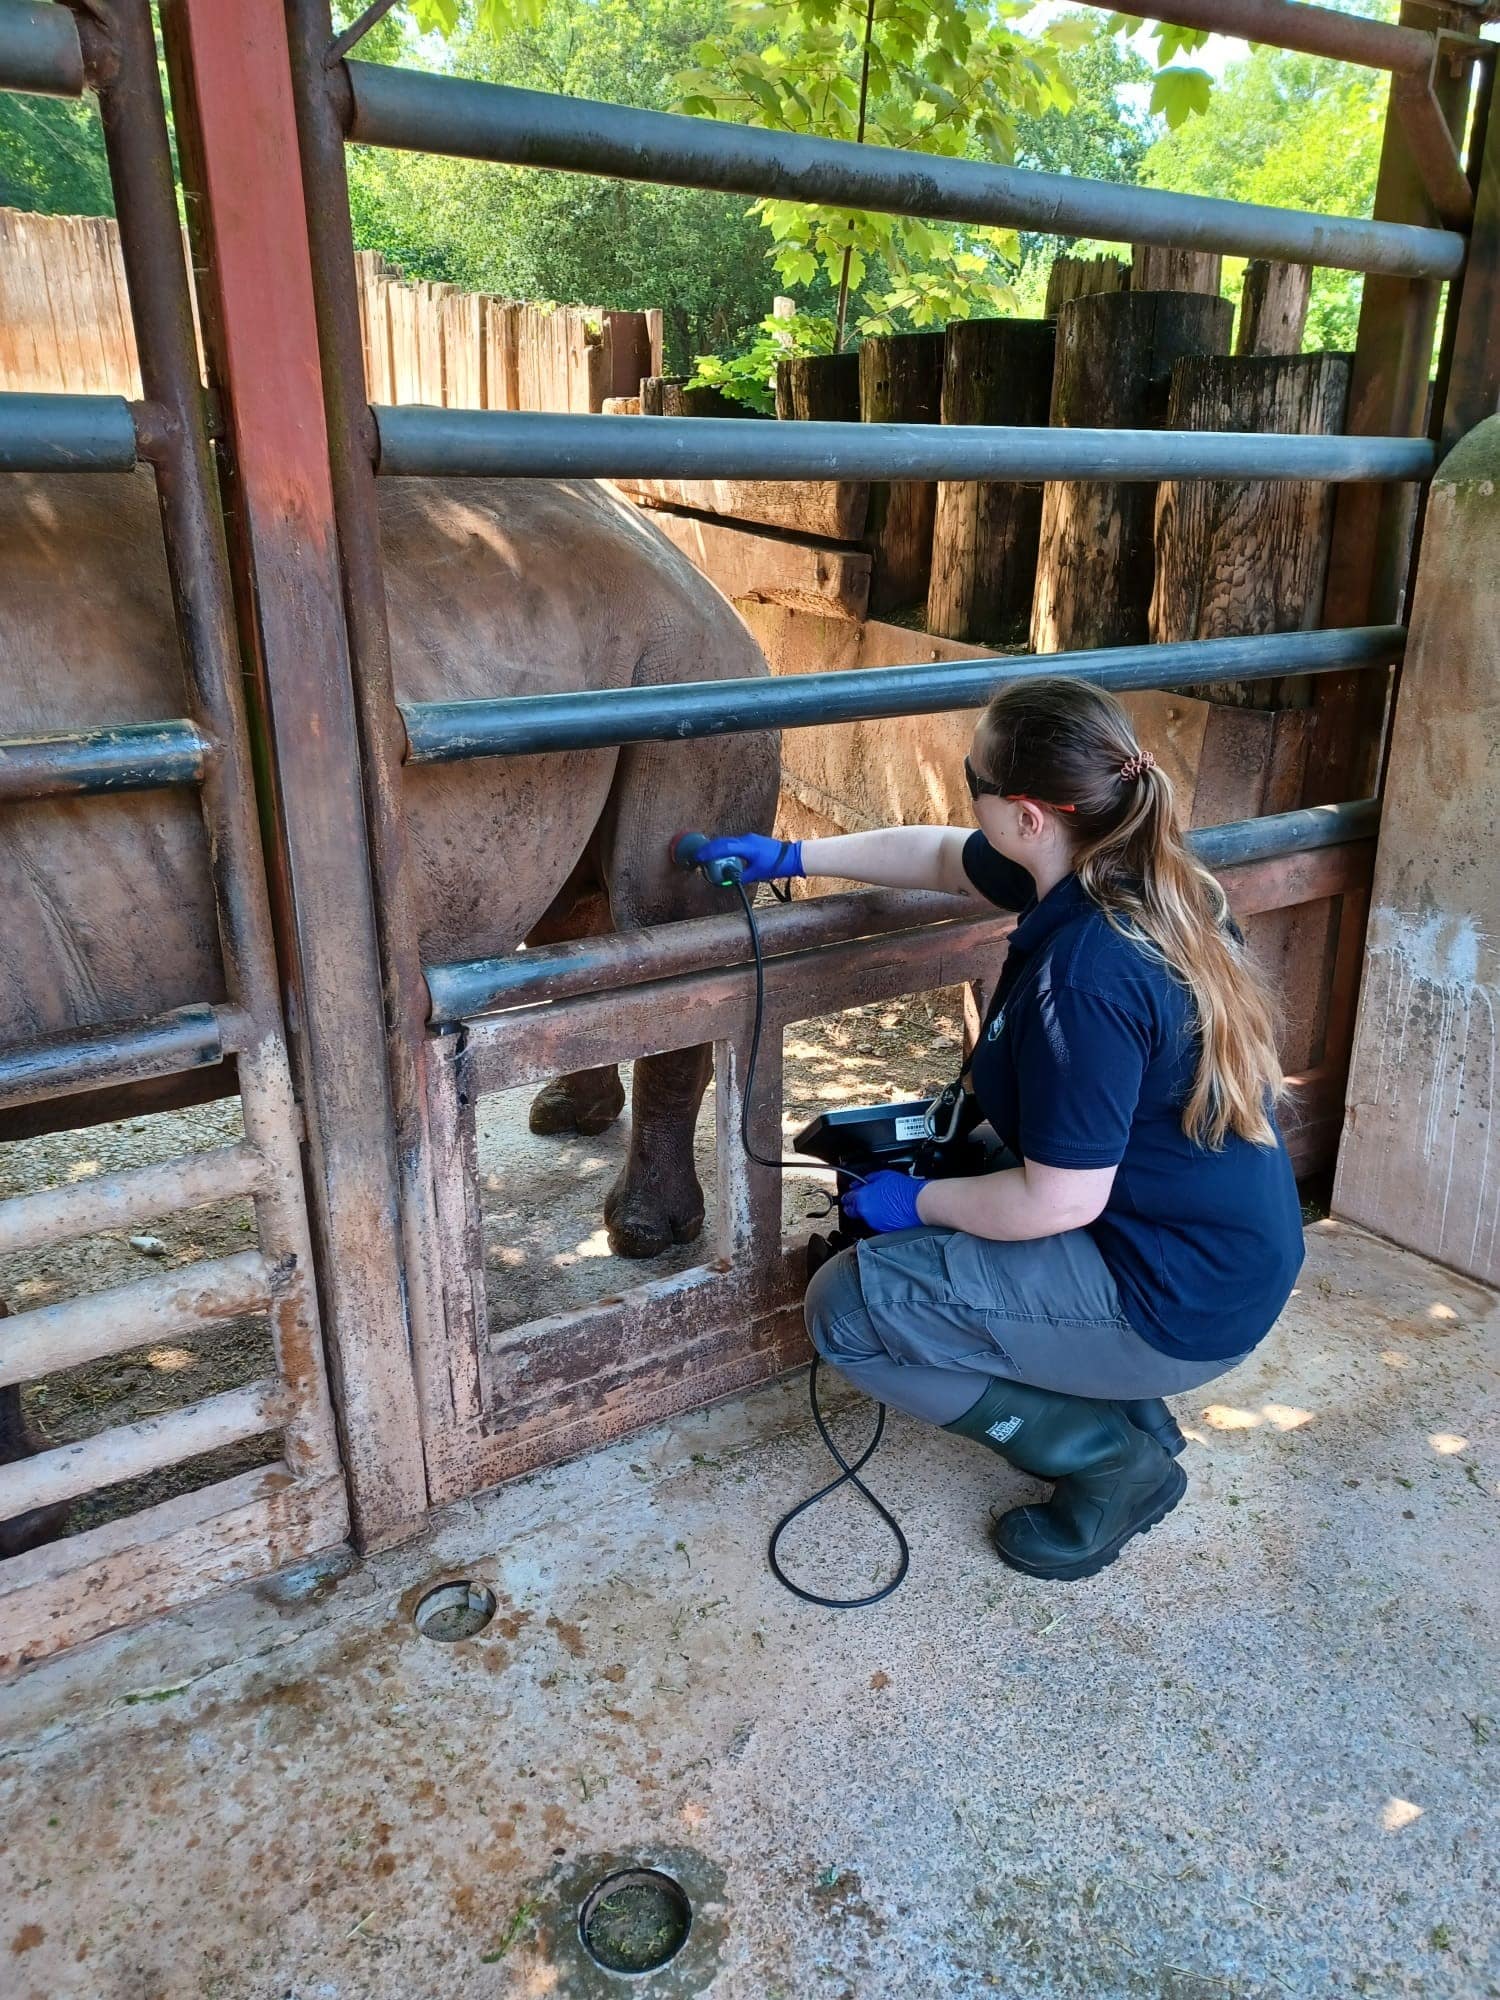 Behind the scenes at Paignton Zoo: A day in the life of a vet nurse